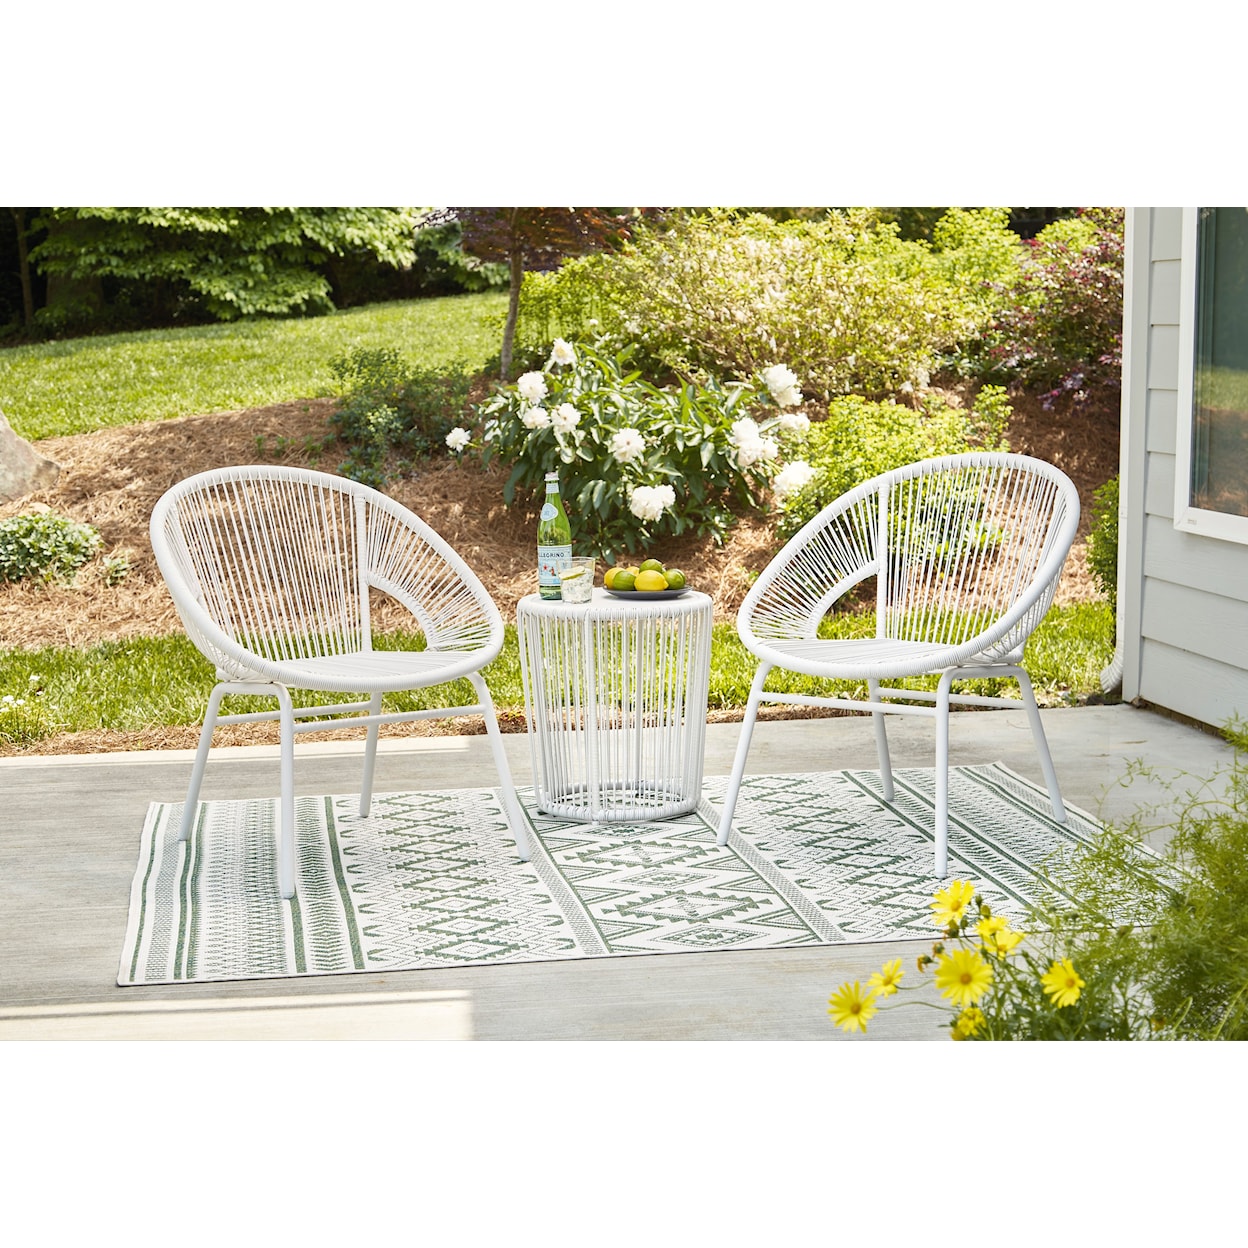 Michael Alan Select Mandarin Cape Outdoor Table and Chairs (Set of 3)